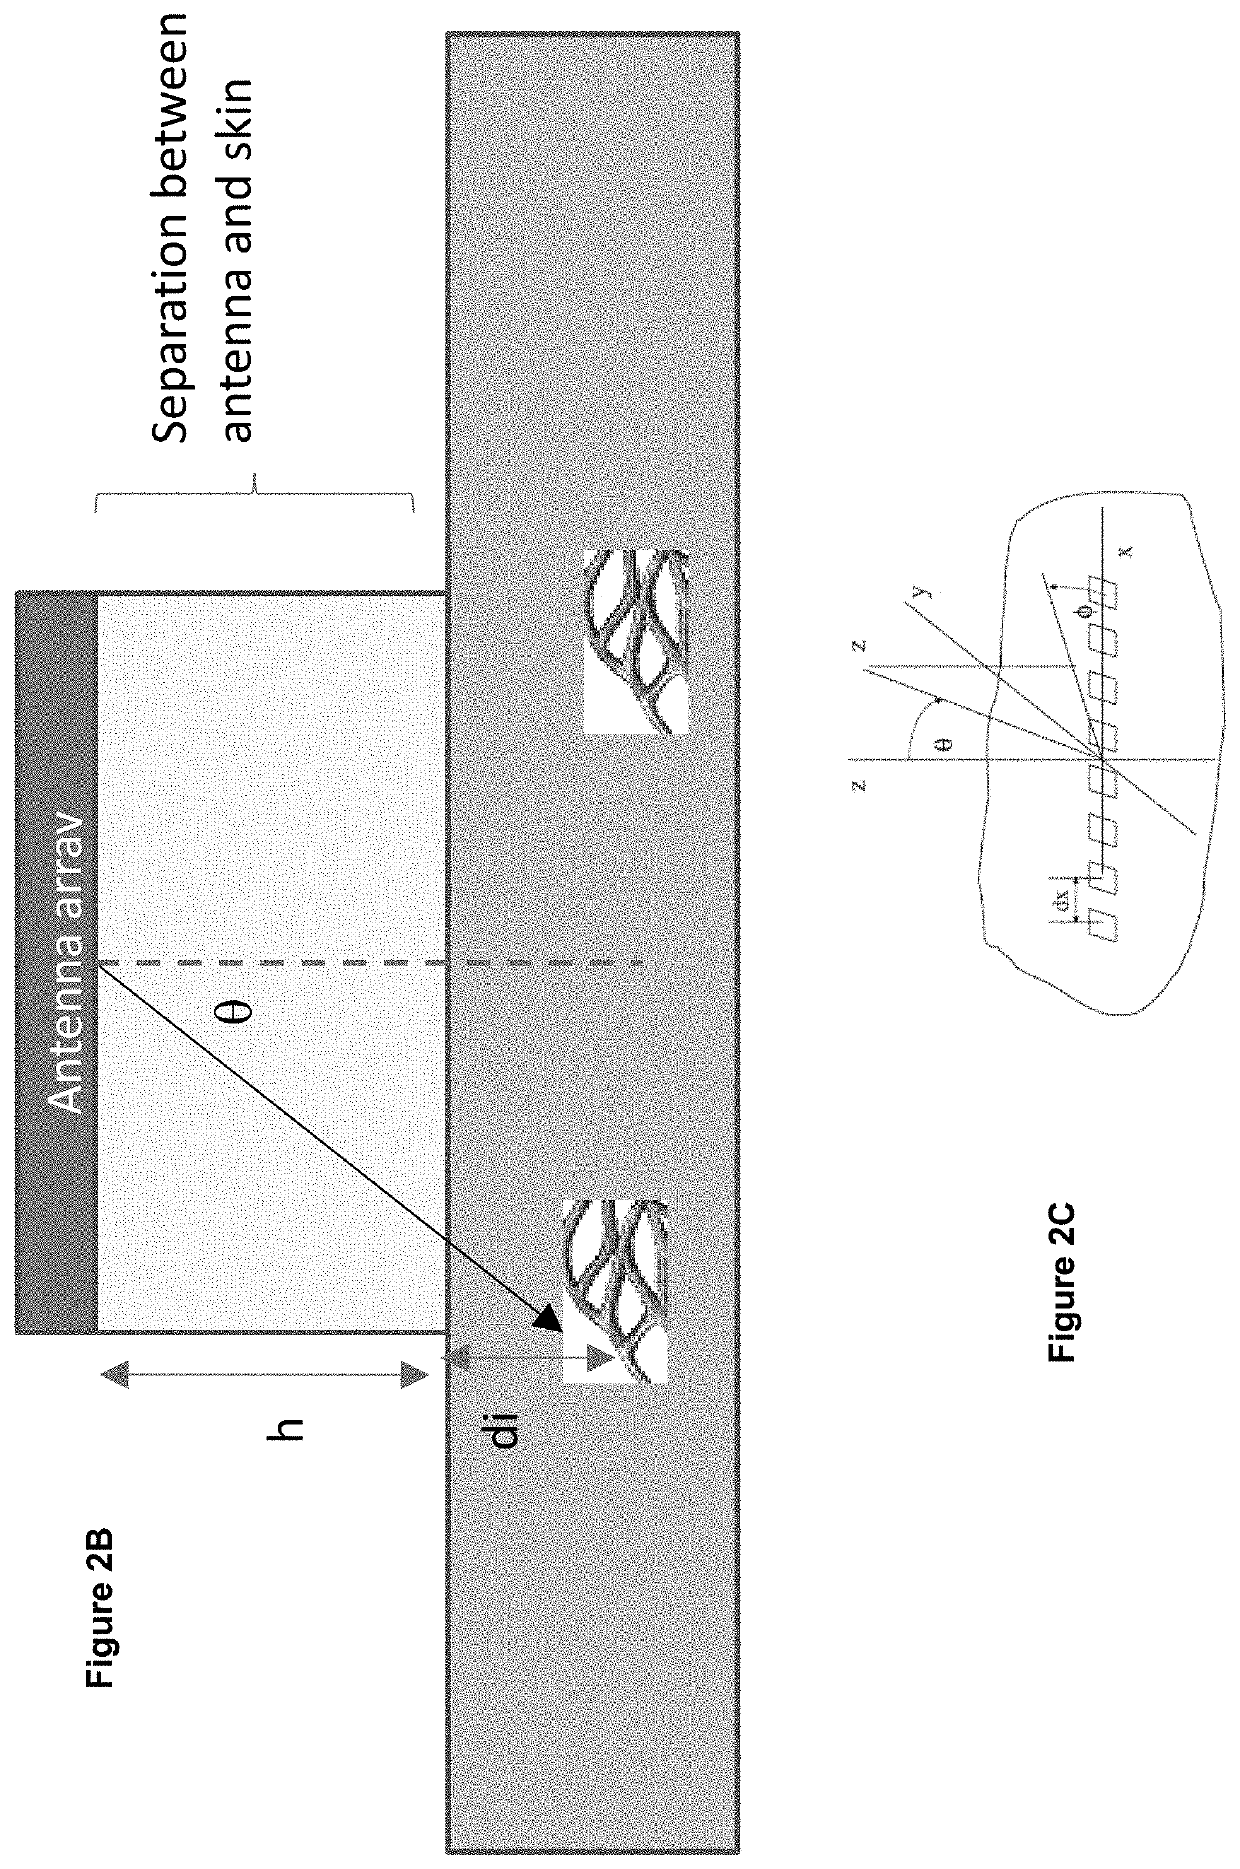 Non-invasive biological, chemical markers and tracers monitoring device in blood including glucose monitoring using adaptive RF circuits and antenna design